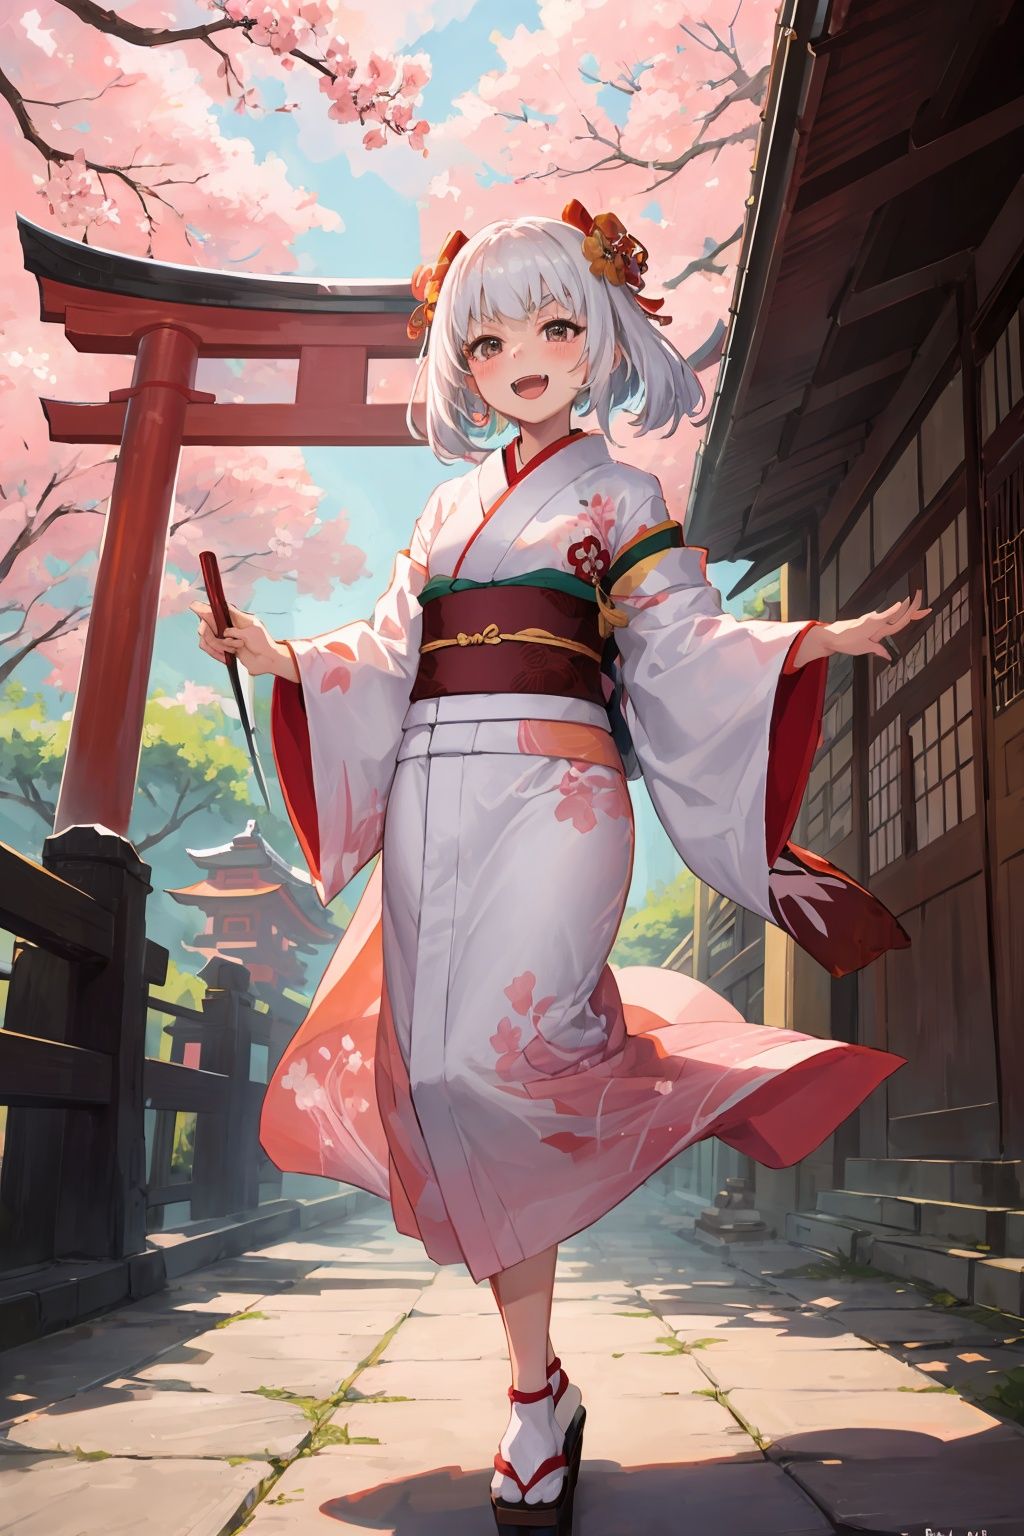 Original Character, Volumetric Lighting, Best Shadows, Shallow Depth of Field, Portrait Of Stunningly Beautiful Girl, Petite, Delicate Beautiful Attractive Face With Alluring Black Eyes, Sharp Eyebrows, Broadly Smiling, Open Mouth, Cute Fangs, Lovely Small Breasts, Layered Medium White Hair, Blush Eyeshadow, Traditional Floral Long Kimono, Kimono Obi, Okobo Shoes, Holding Oil-Paper Umbrella, Cherry Blossom Tree, Flower Branch, With Falling Petals, East Asia Architecture, Standing Looking Up In Little Shrine, Torii Gates, Saisen Bako, Stone Lantern, (Highest Quality, Amazing Details:1.25), (Solo:1.3), Brilliant Colorful Paintings